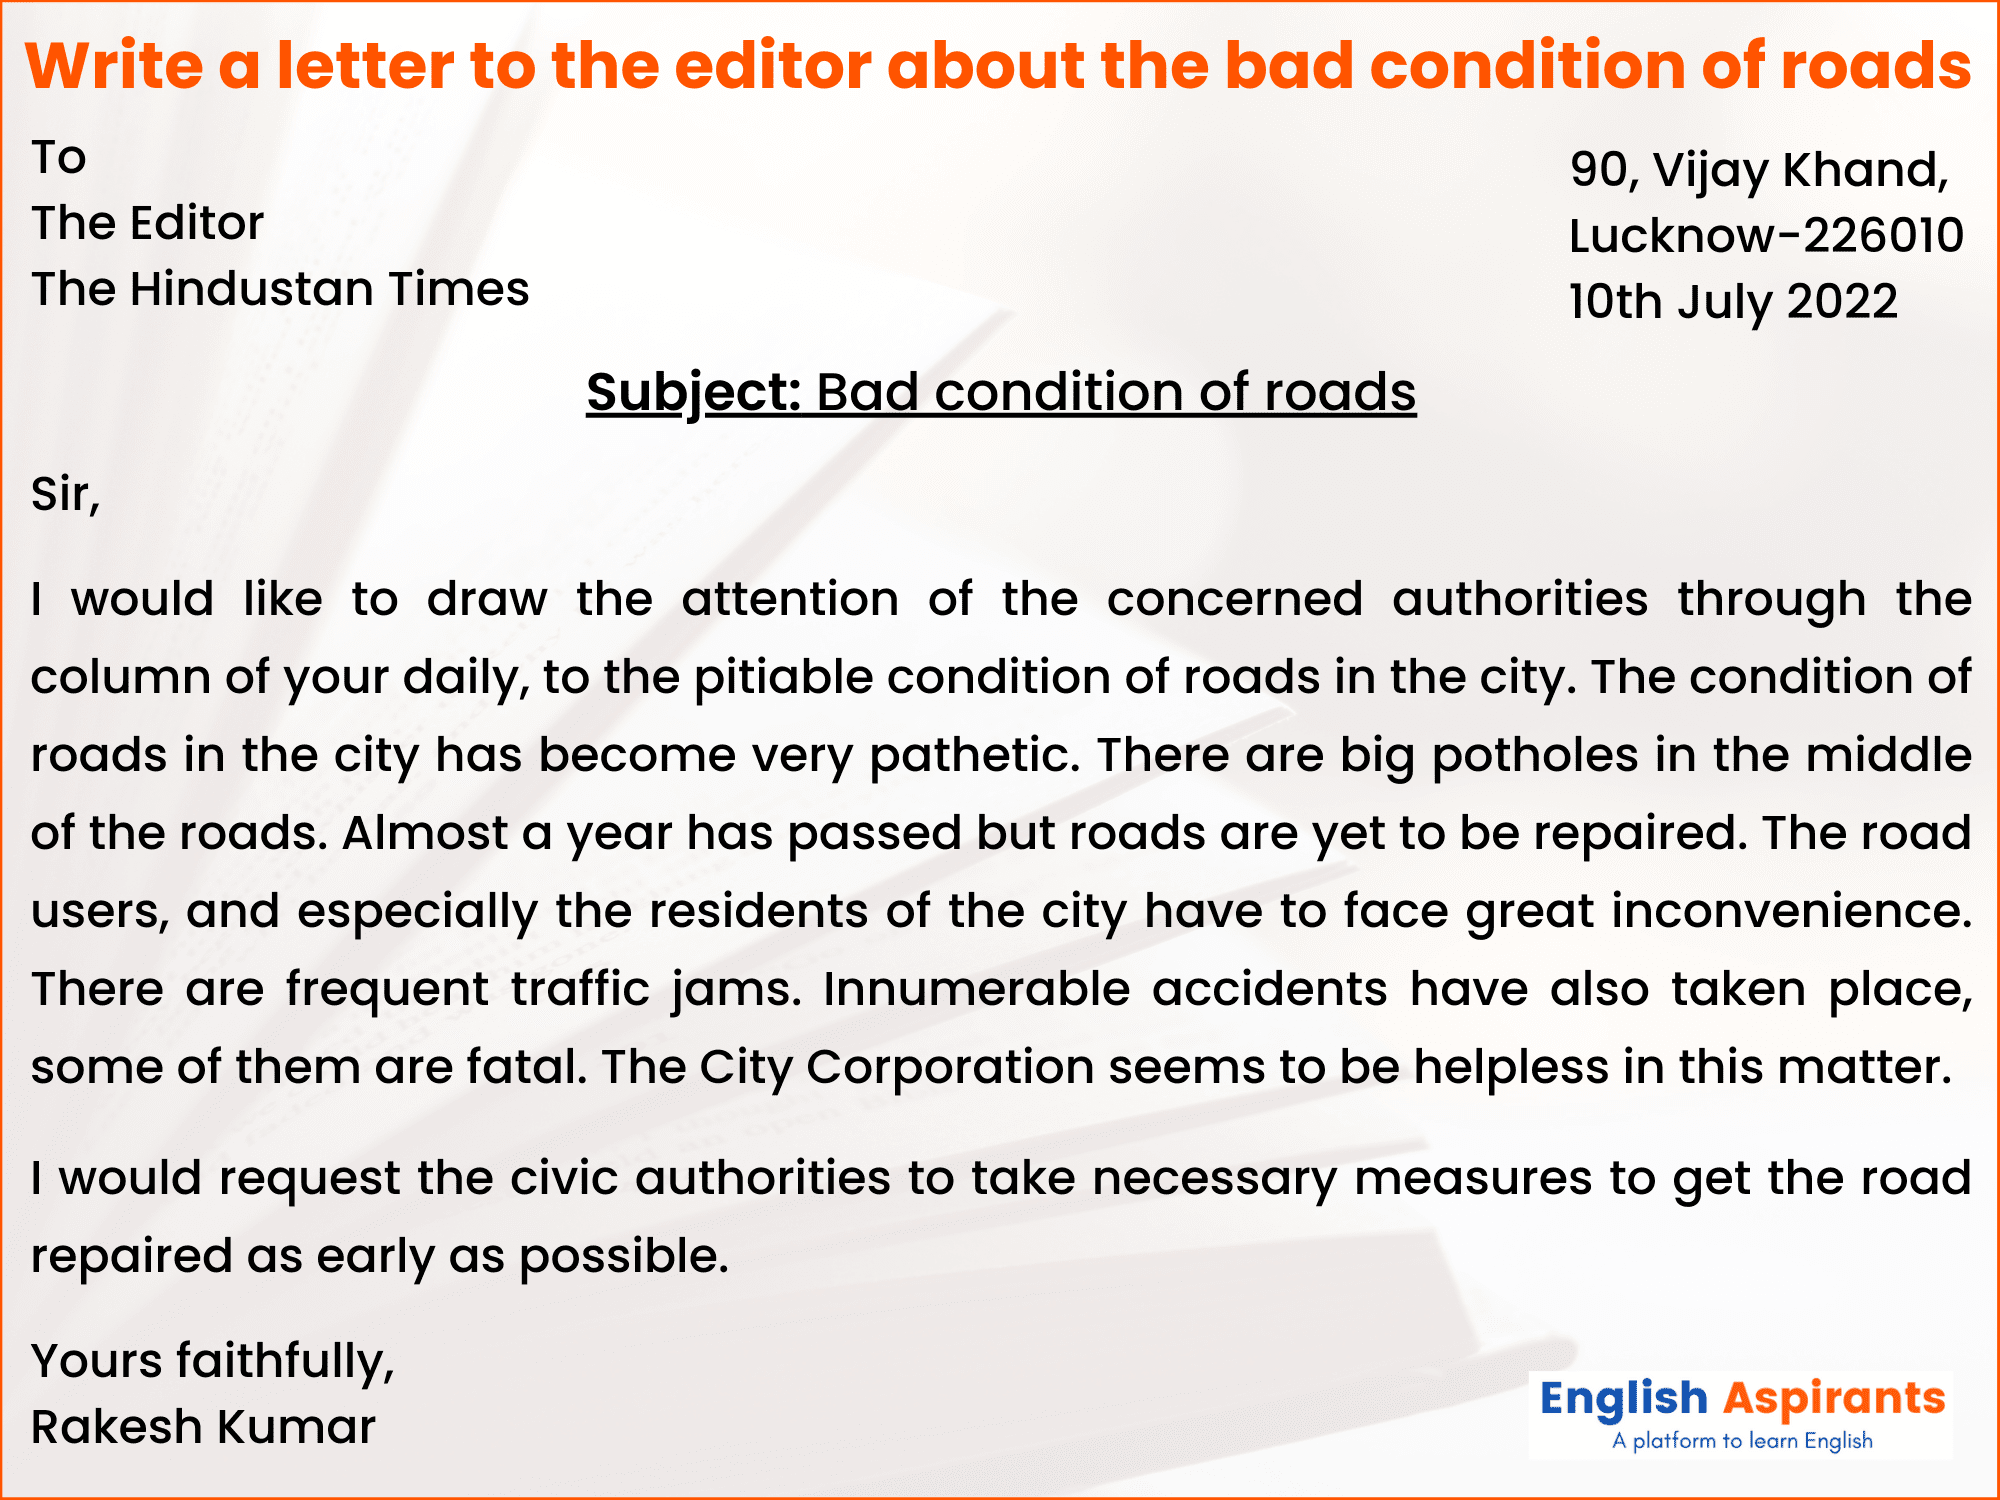 Write a letter to the editor of a newspaper about the bad condition of roads